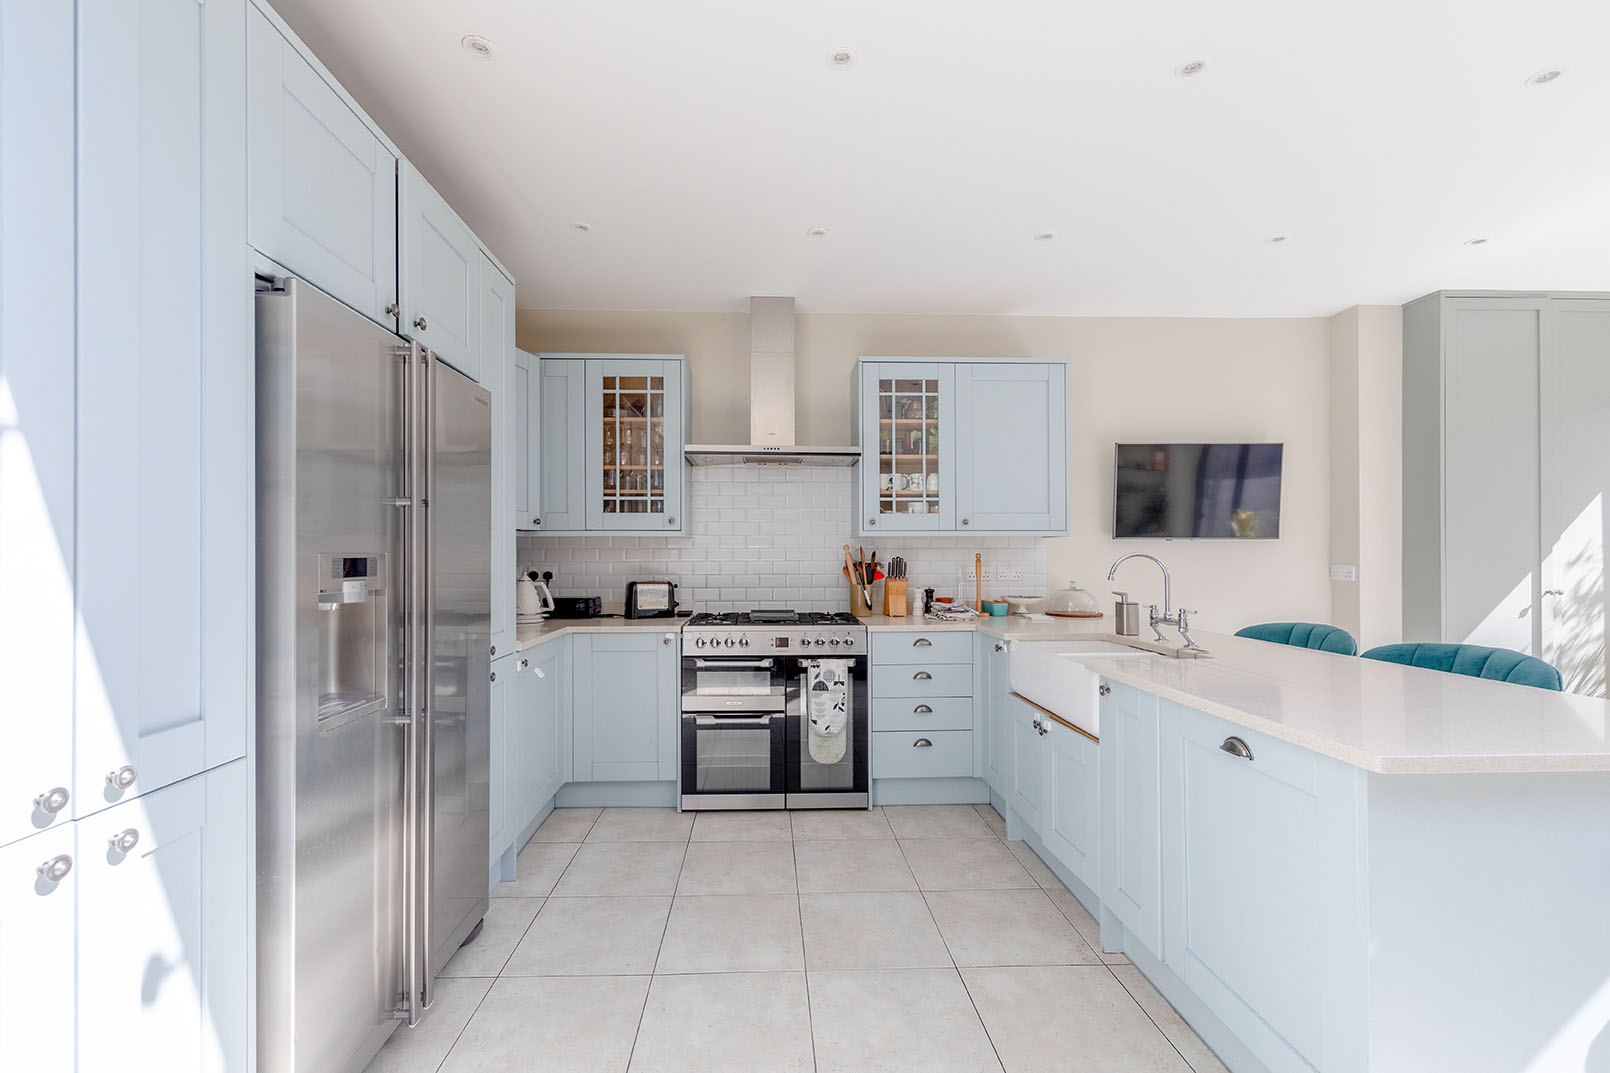 Direct angle of a large, open plan kitchen with light blue cupboards, modern design and showing all the appliances.